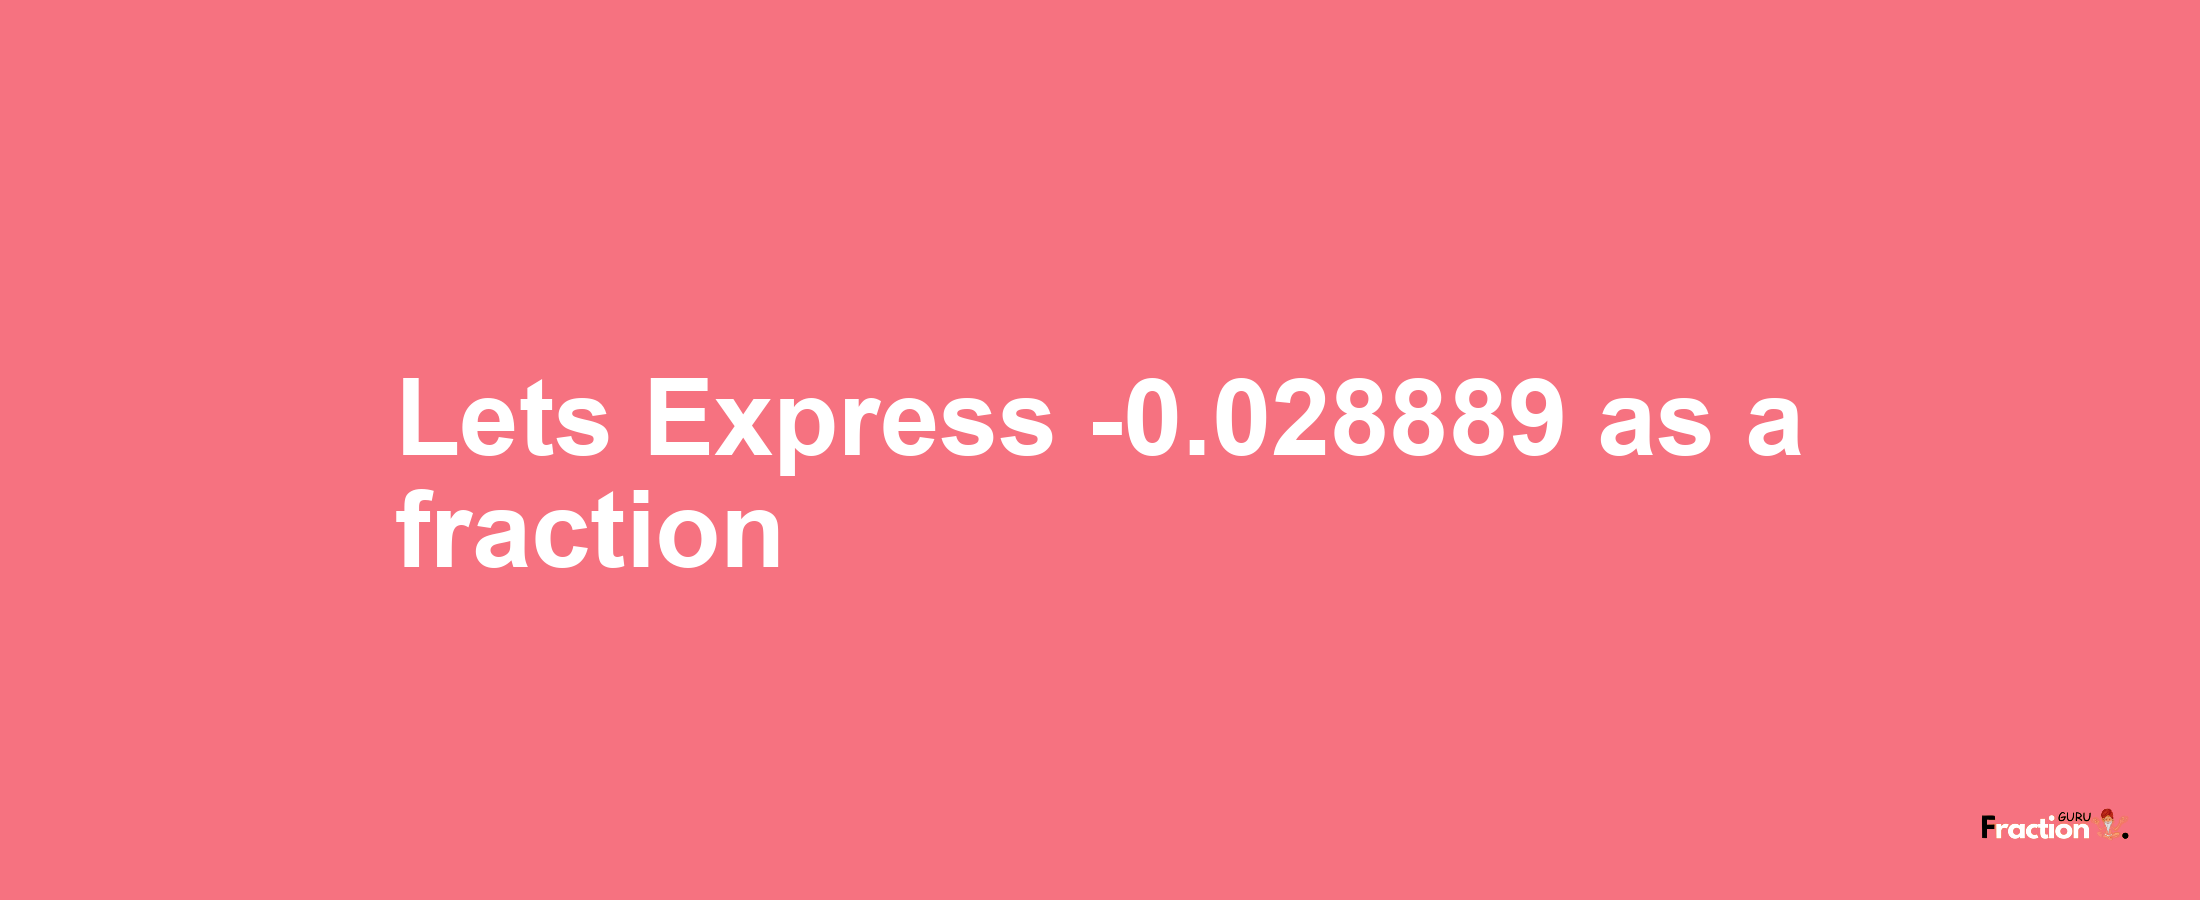 Lets Express -0.028889 as afraction